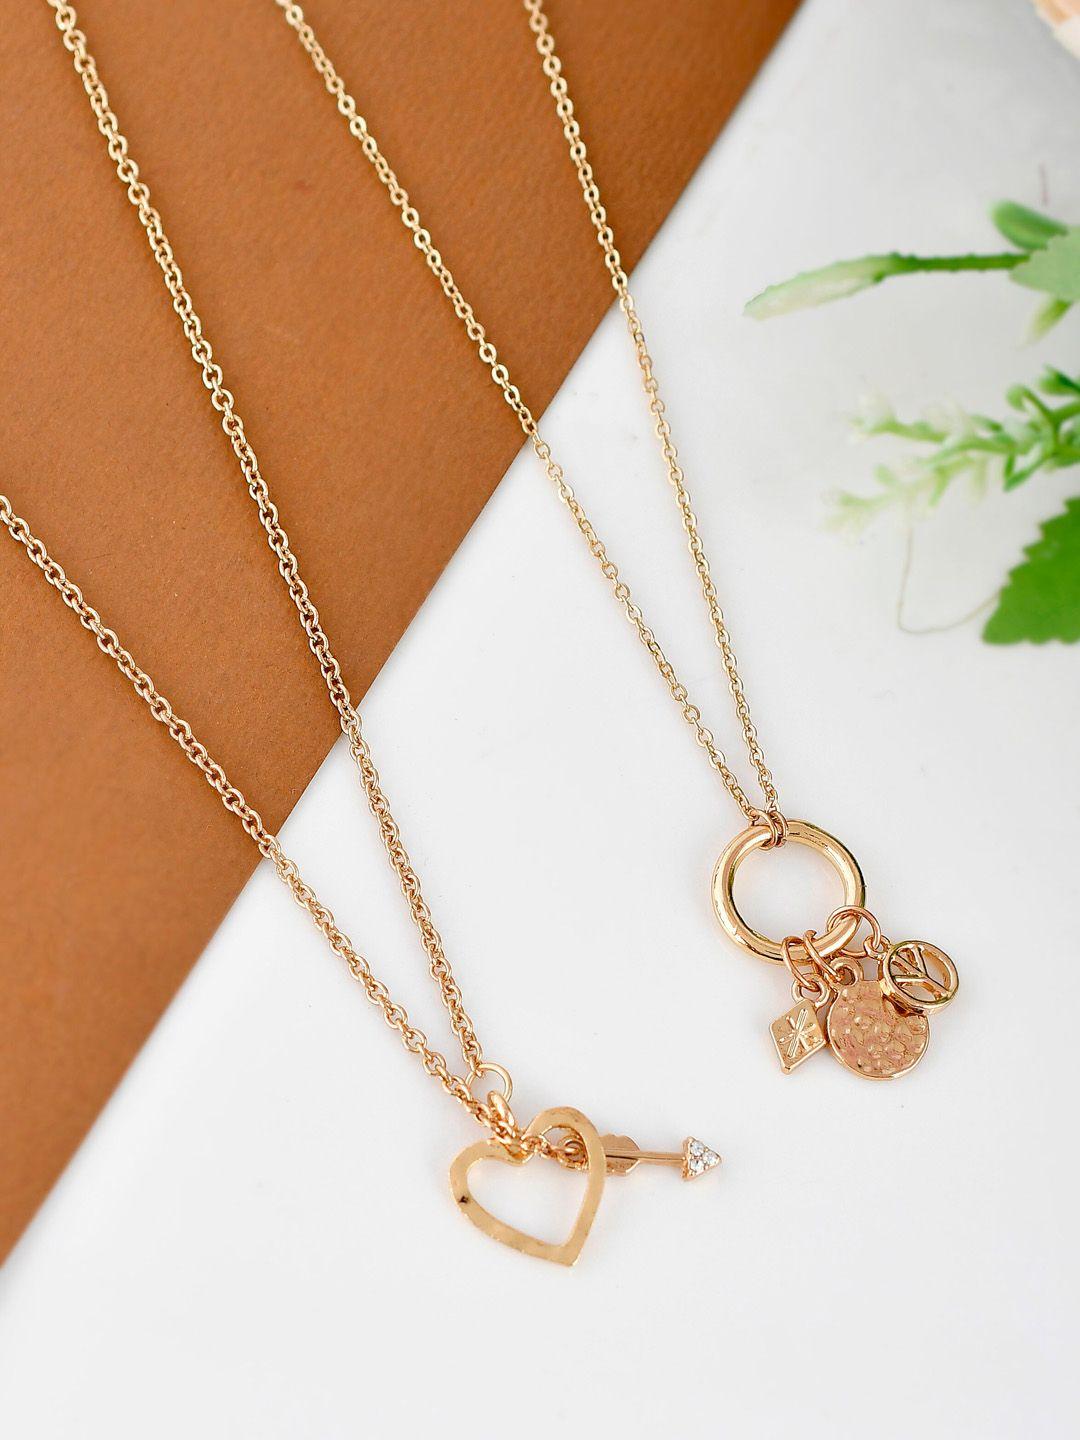 shoshaa set of 2 gold-toned combo heart shaped pendants with chains